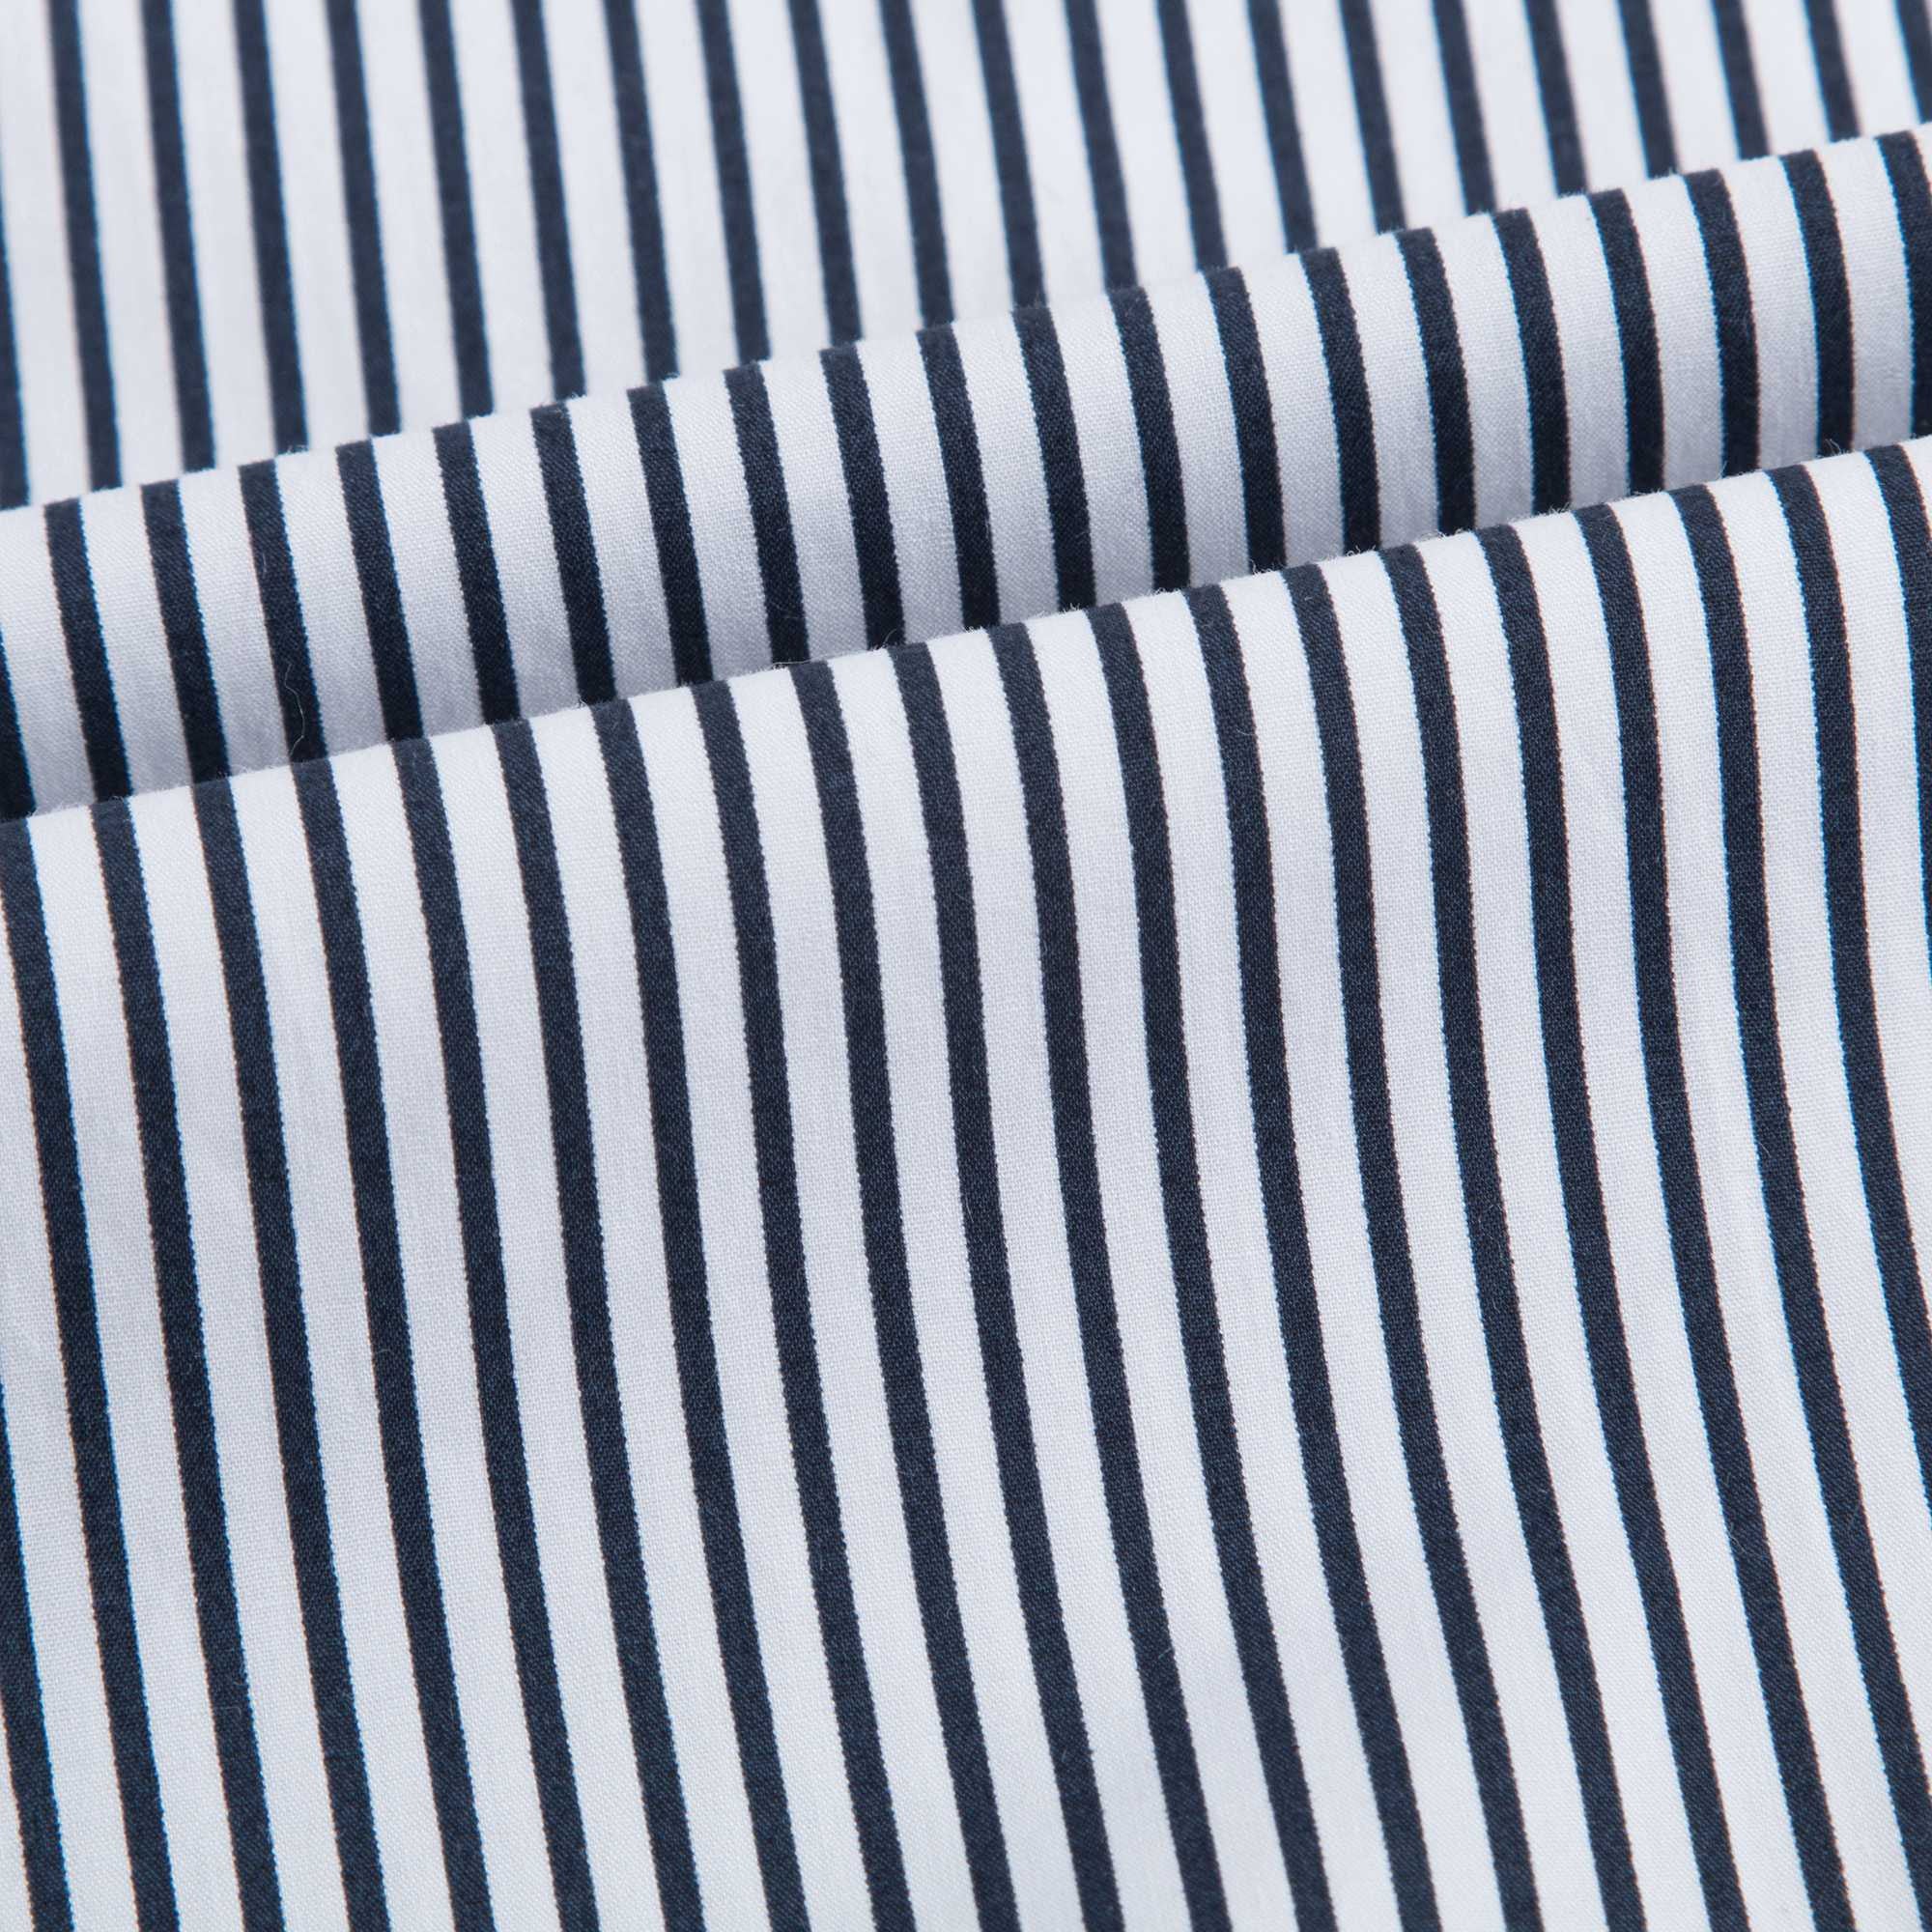 Girls Blue & White Striped Cotton Trousers